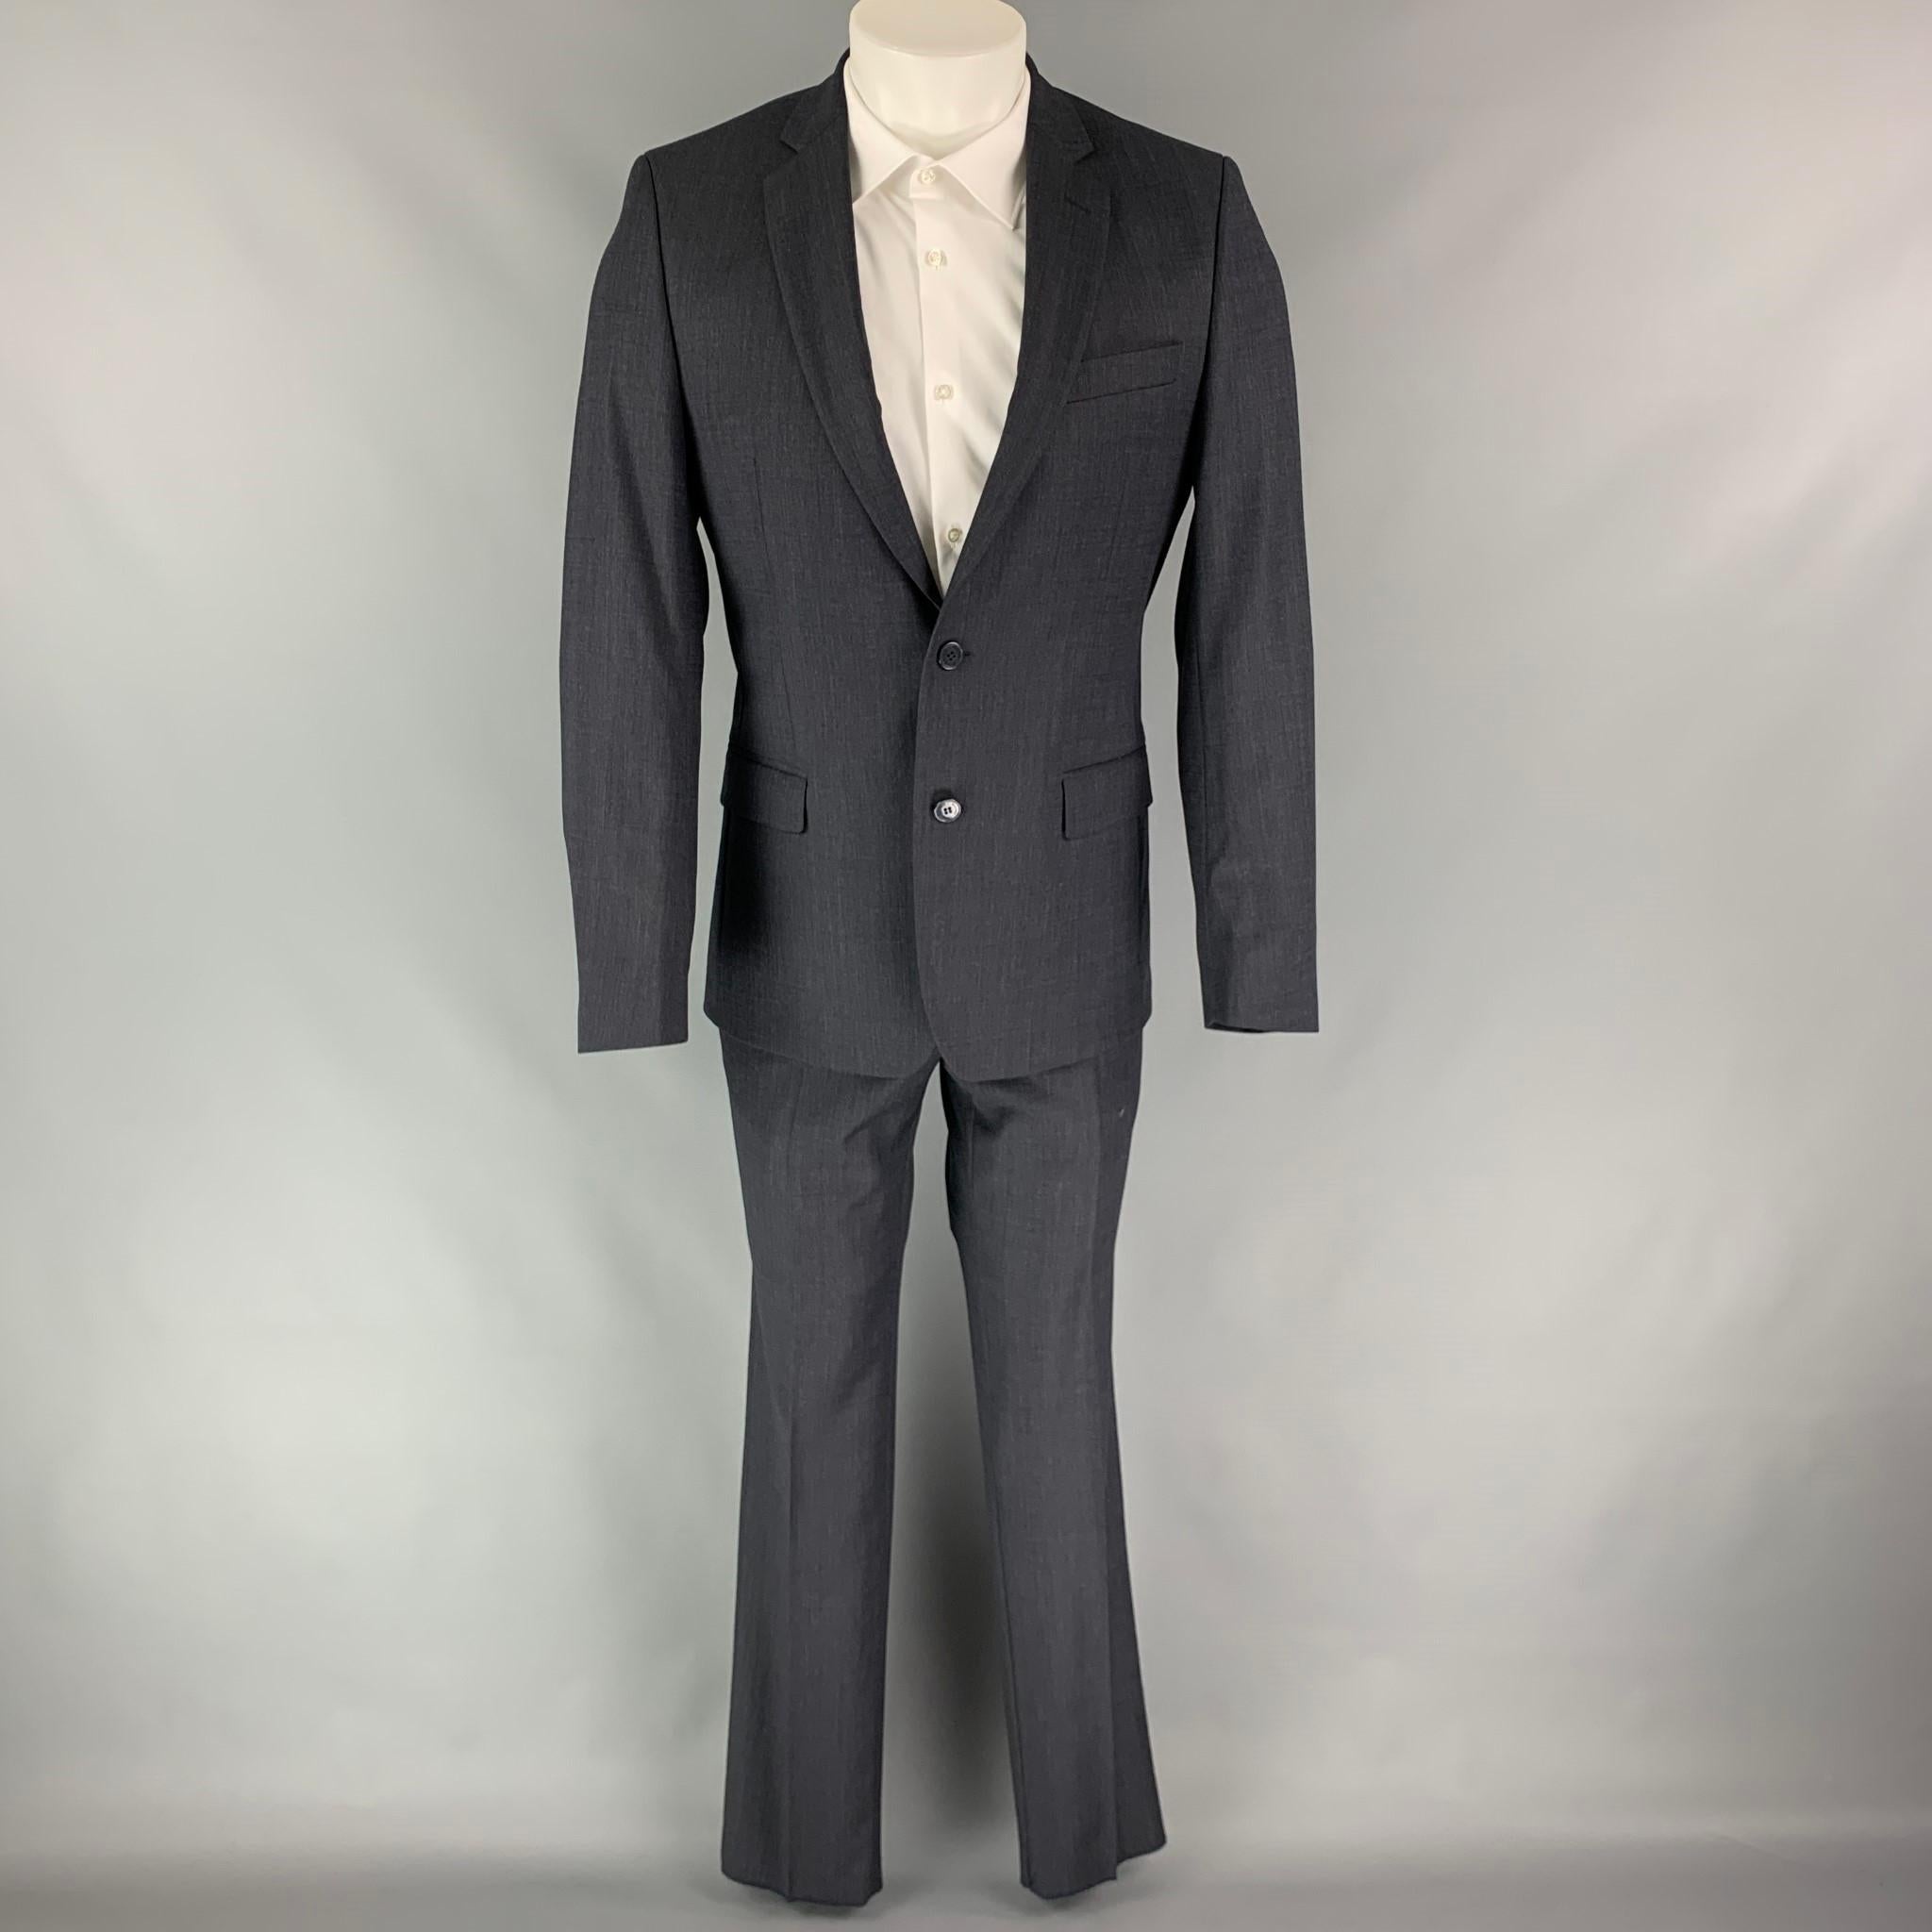 VERSACE COLLECTION suit comes in a charcoal wool with a full liner and includes a single breasted, two button sport coat with a notch lapel and matching flat front trousers.

New With Tags.
Marked: 48

Measurements:

-Jacket
Shoulder: 17 in.
Chest: